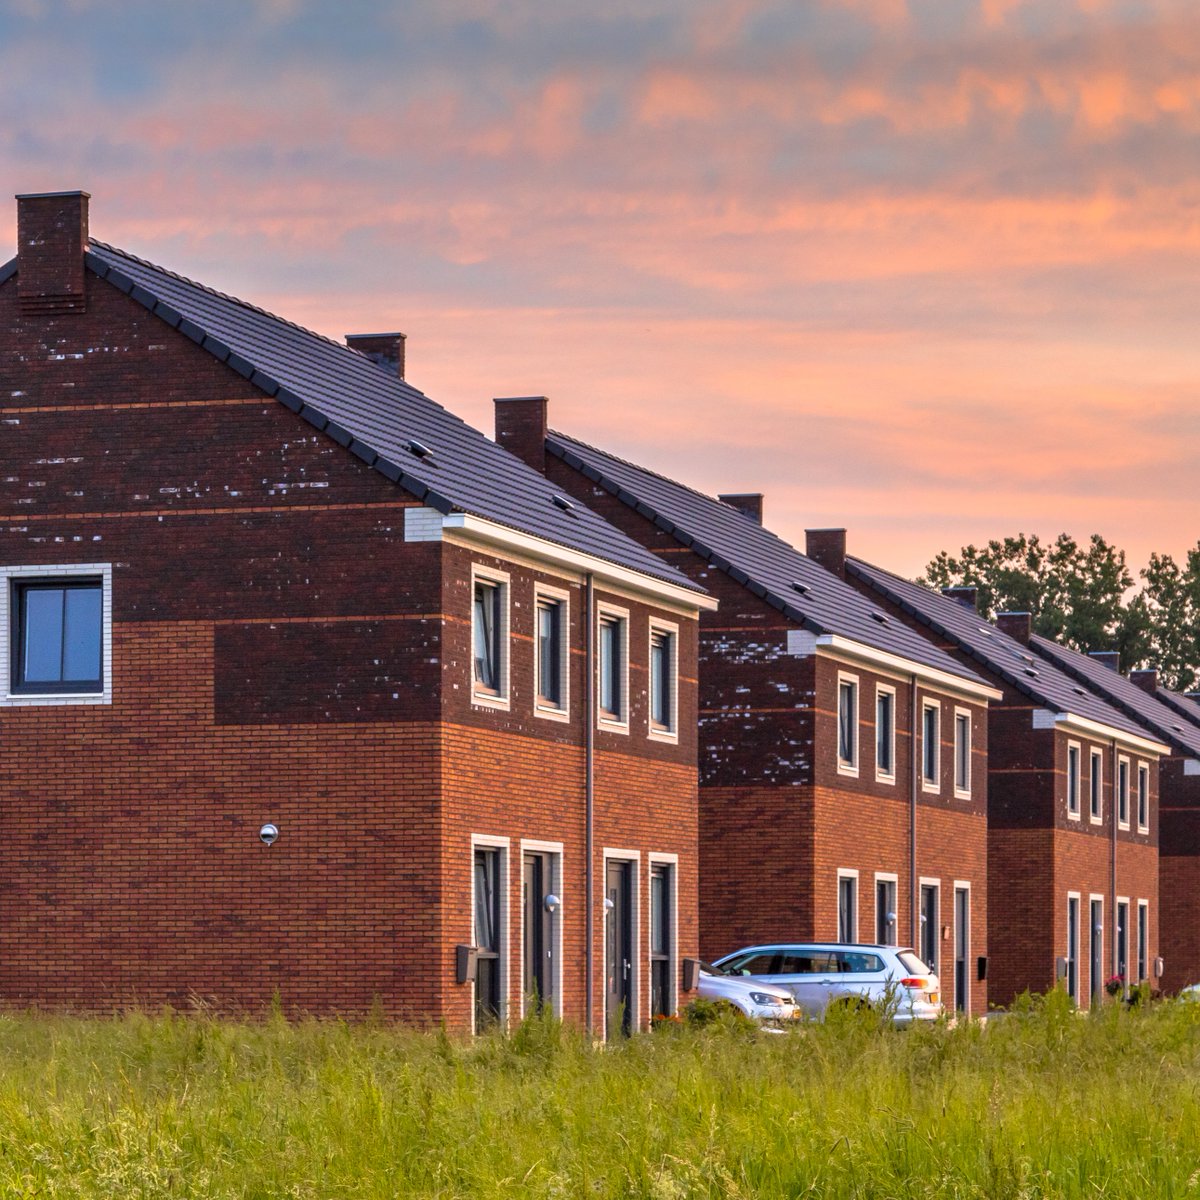 Building social housing: can the Welsh Government do more? The Local Government and Housing Committee has launched an inquiry into social housing supply 📝 Keep an eye out for updates #SocialHousingInquiry 🏘️